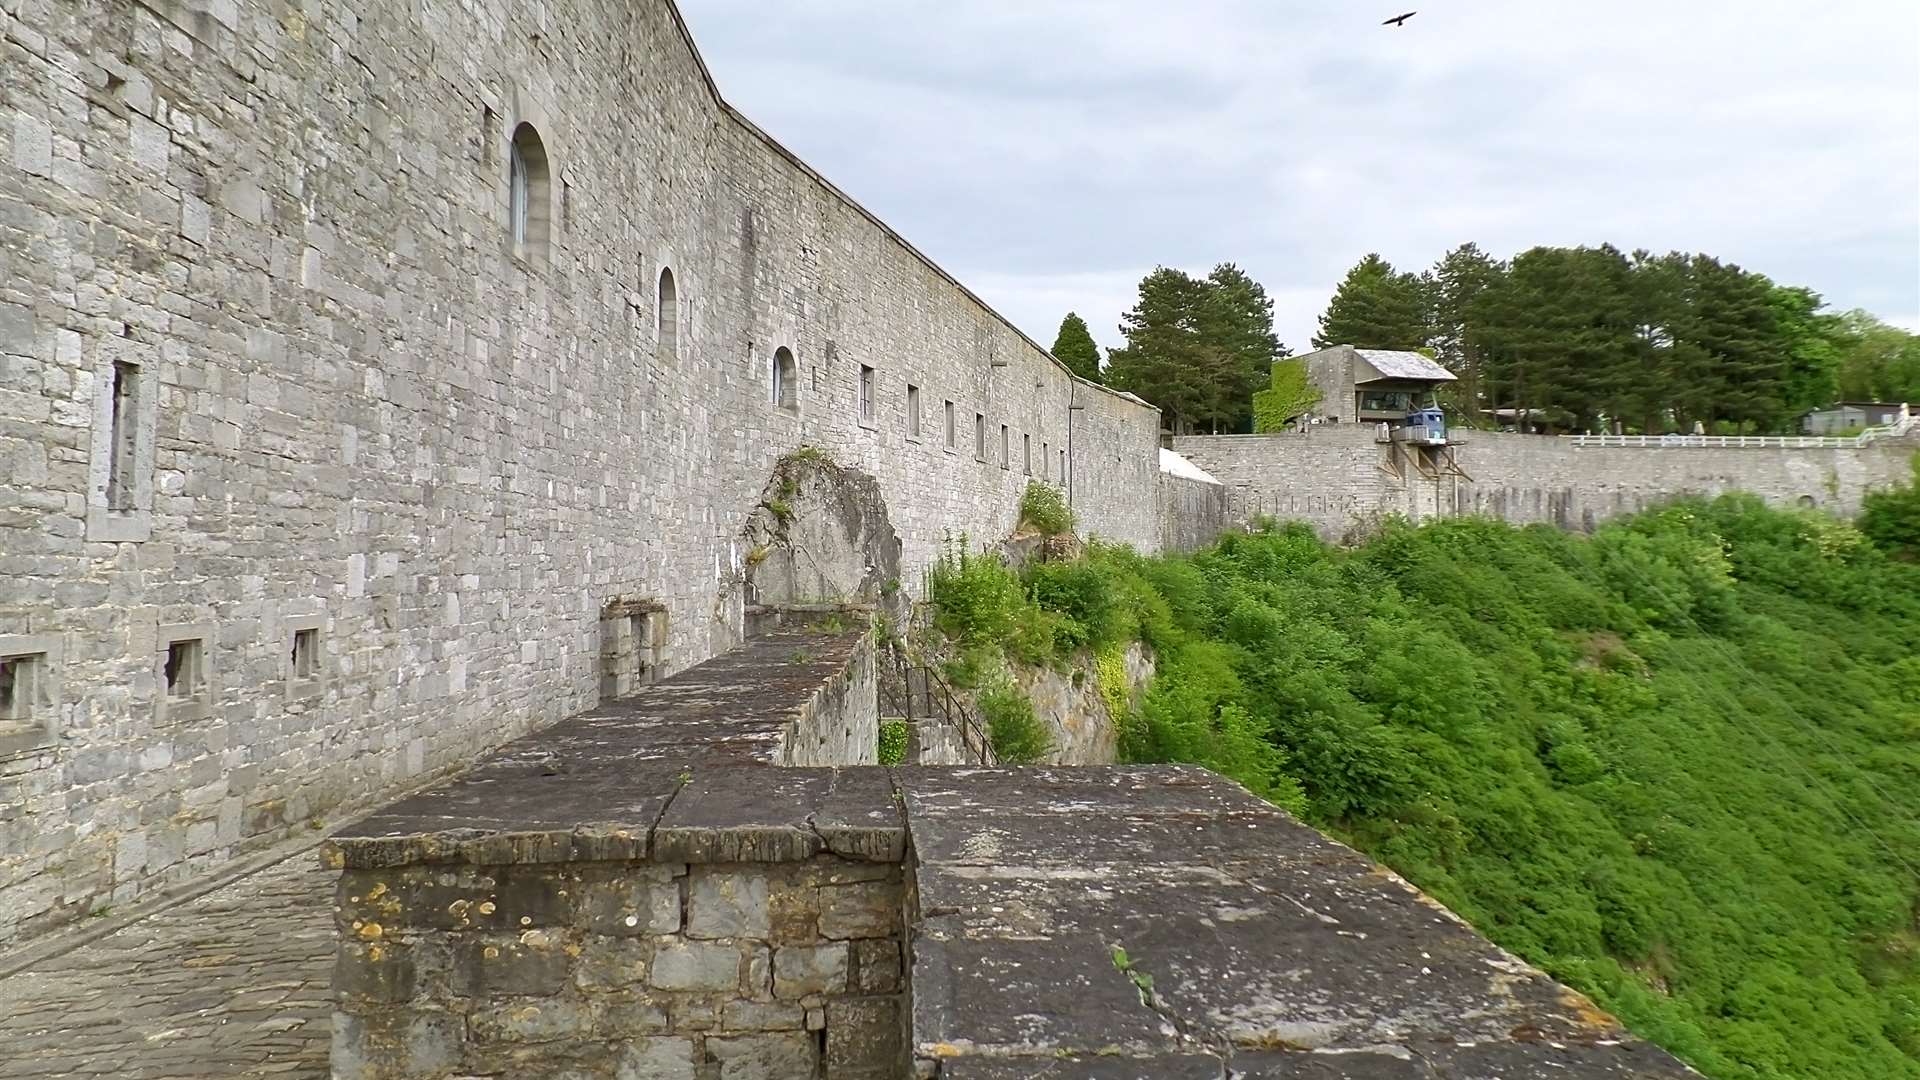 The citadel is open to the public - and well worth the 400 plus steps it takes to reach it